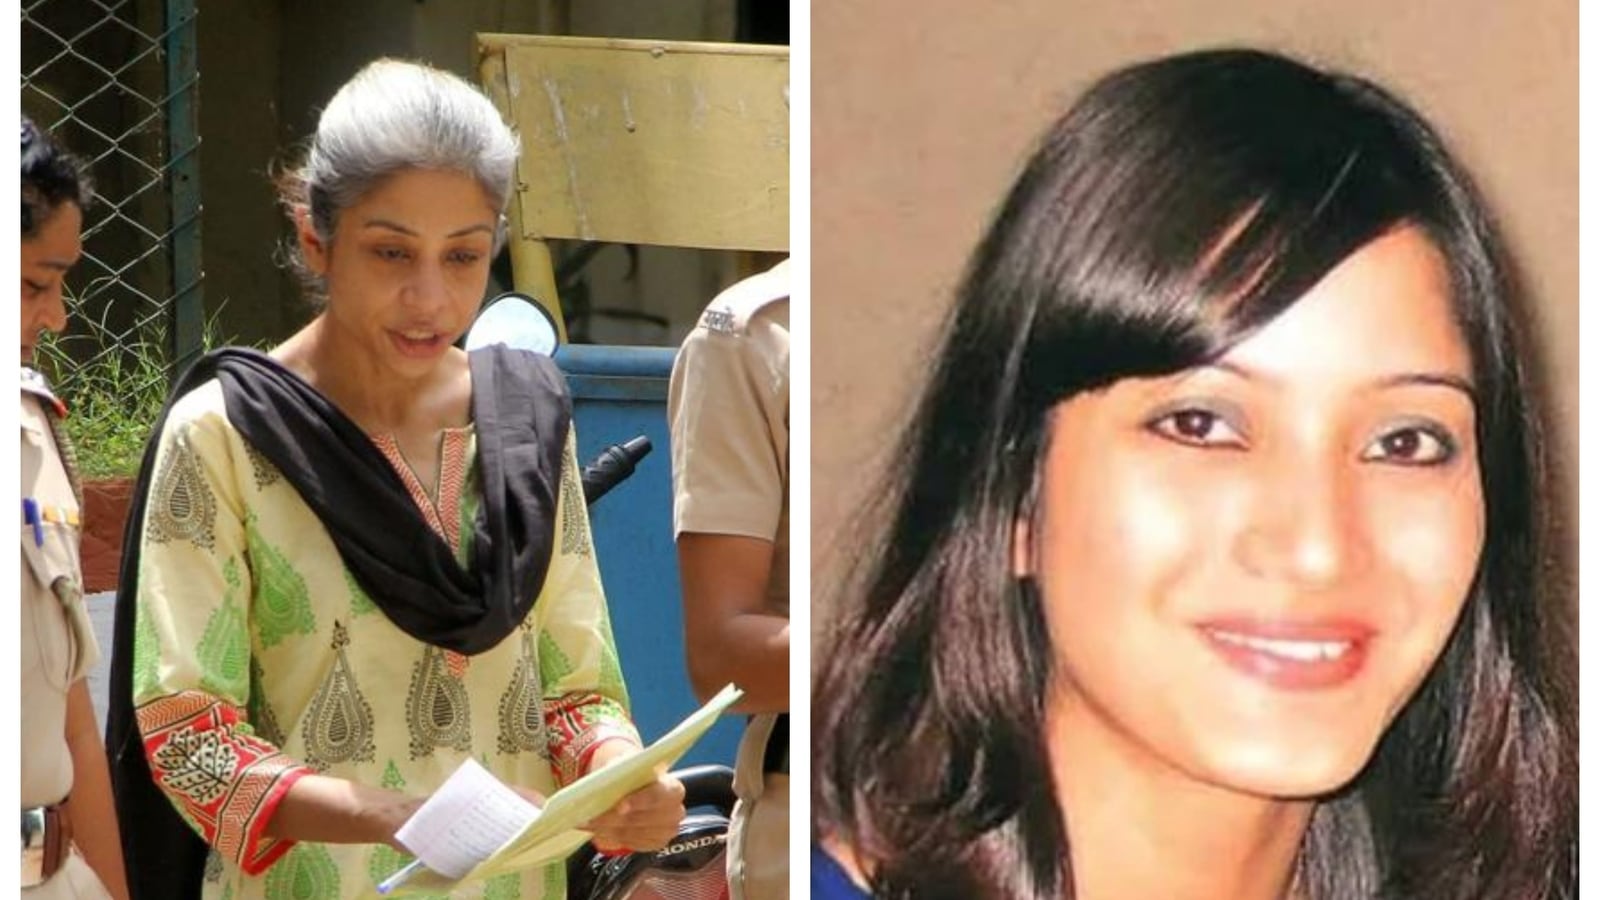 Sheena Bora murder case: A timeline of twists and turns | Latest News India  - Hindustan Times